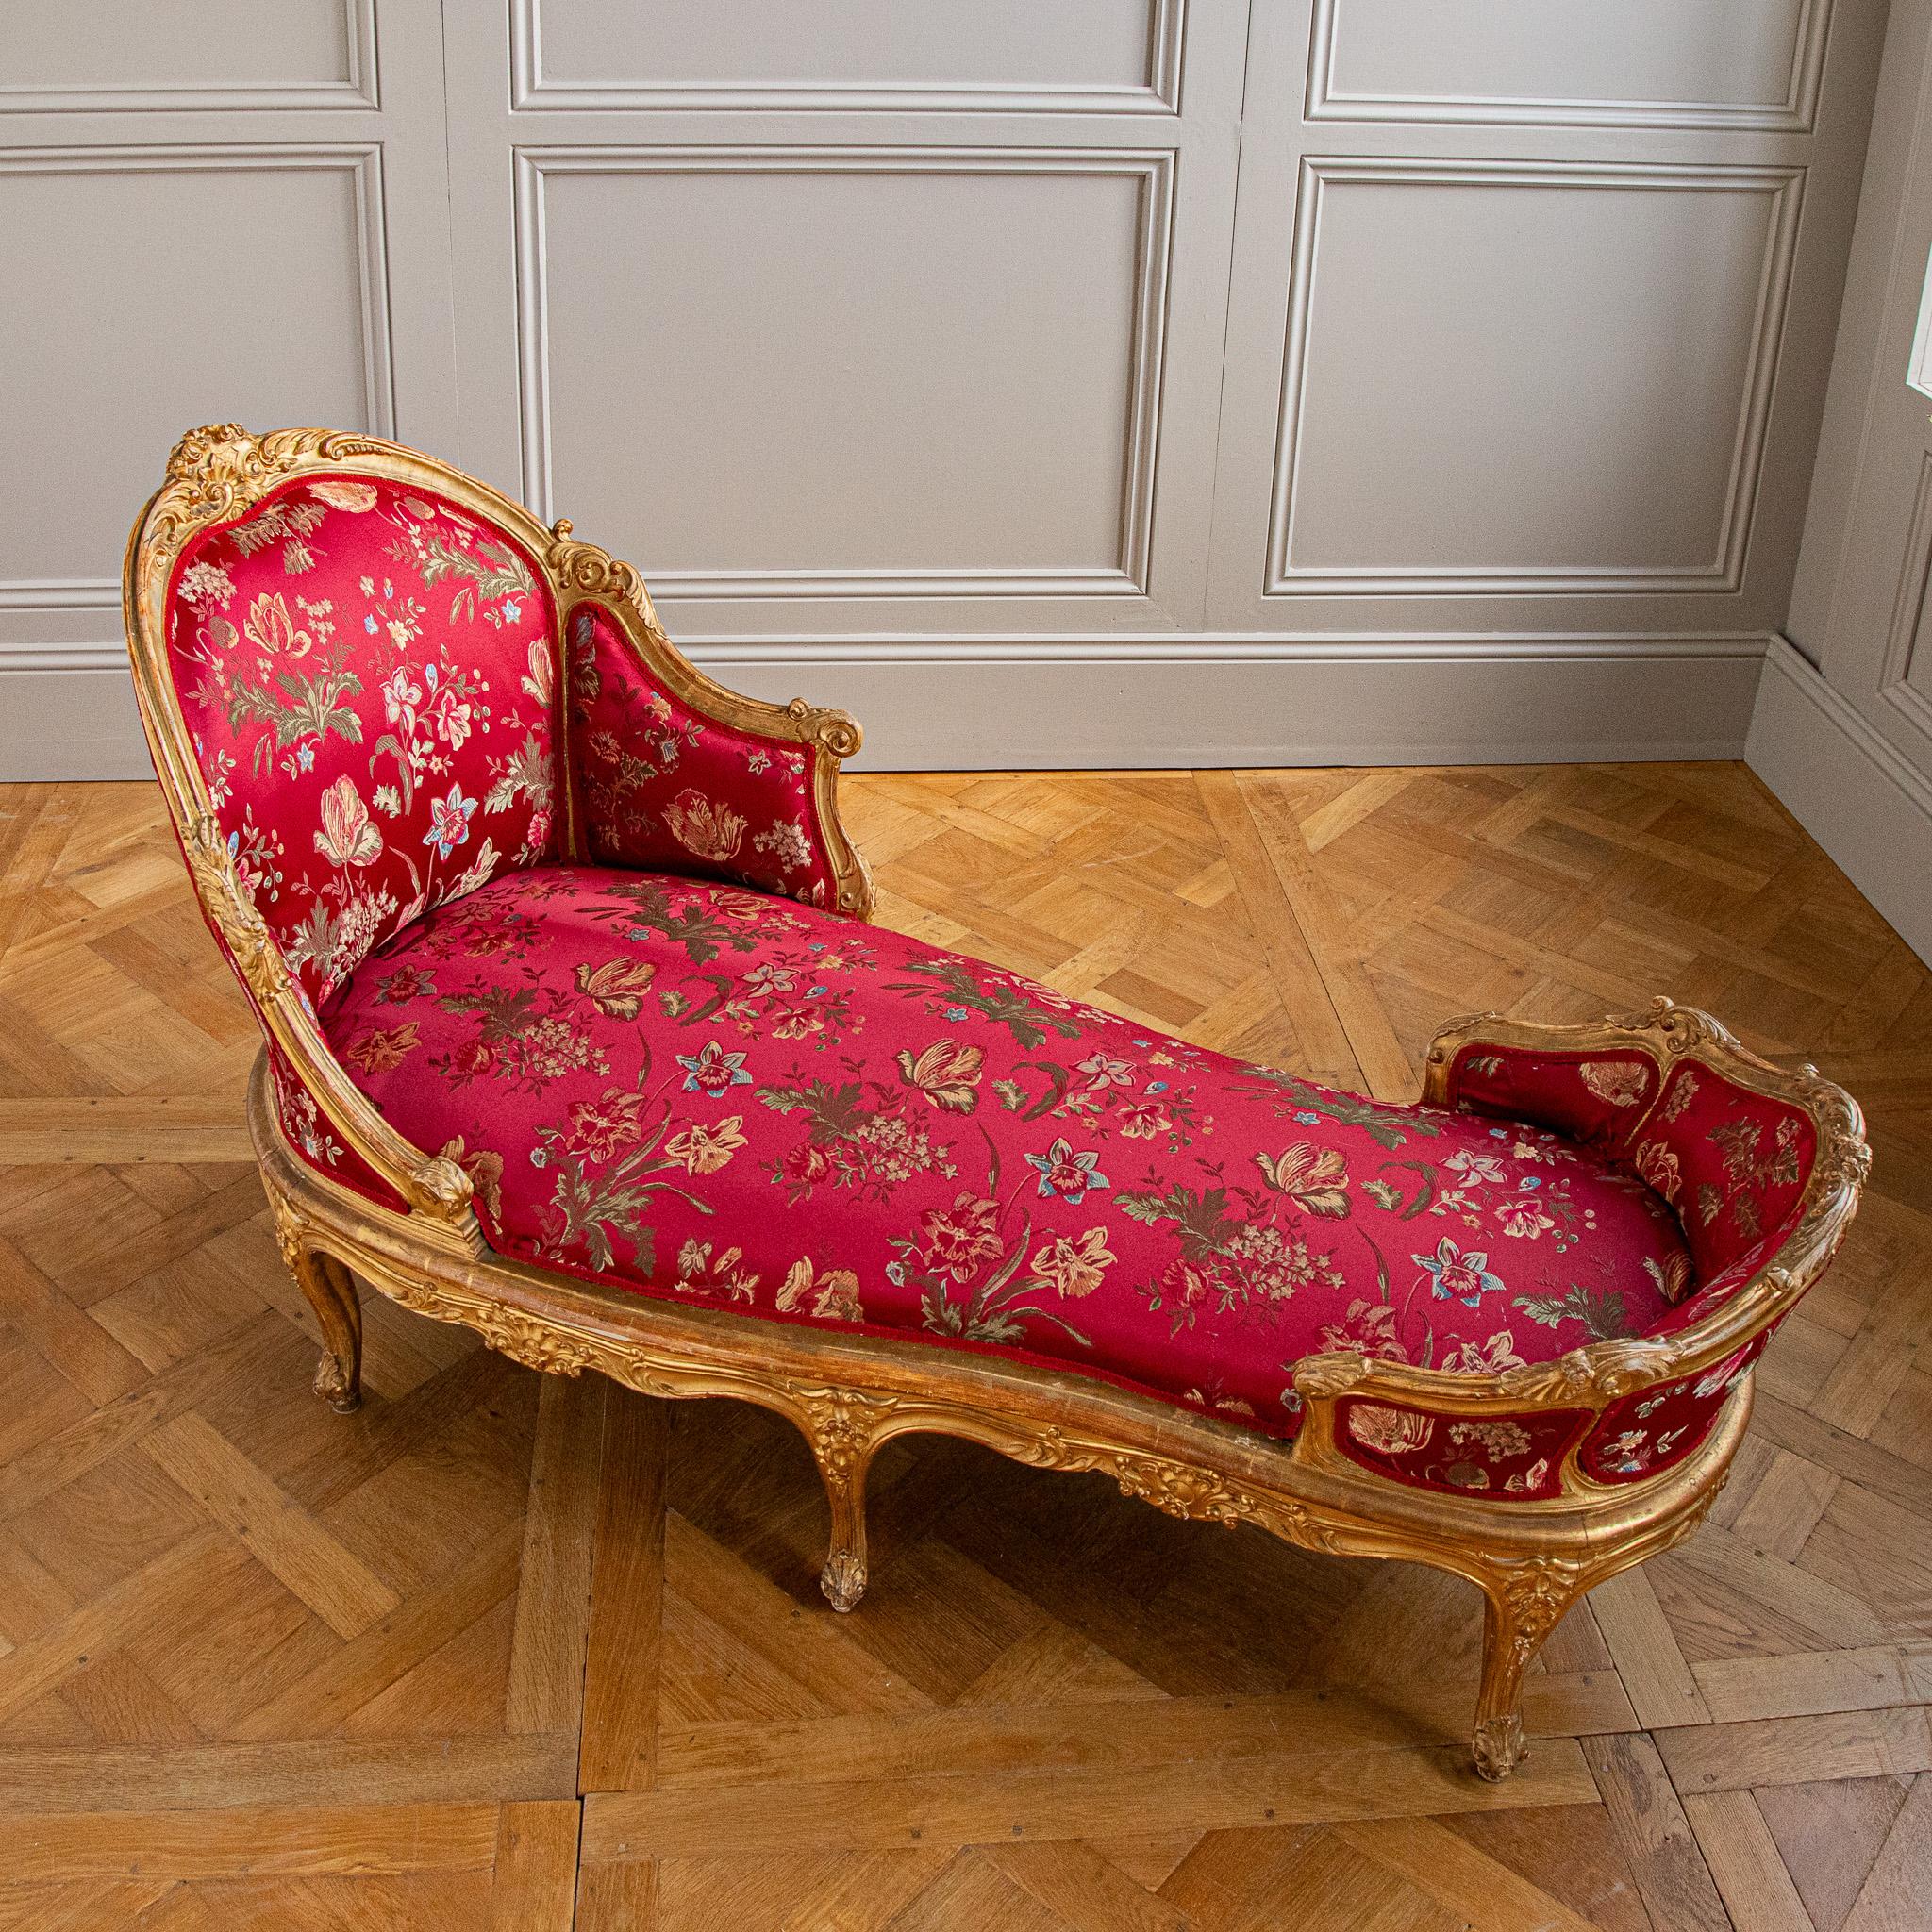 Circa 1880 Italian Giltwood LXV Style Chaise Longue In Good Condition For Sale In London, Park Royal